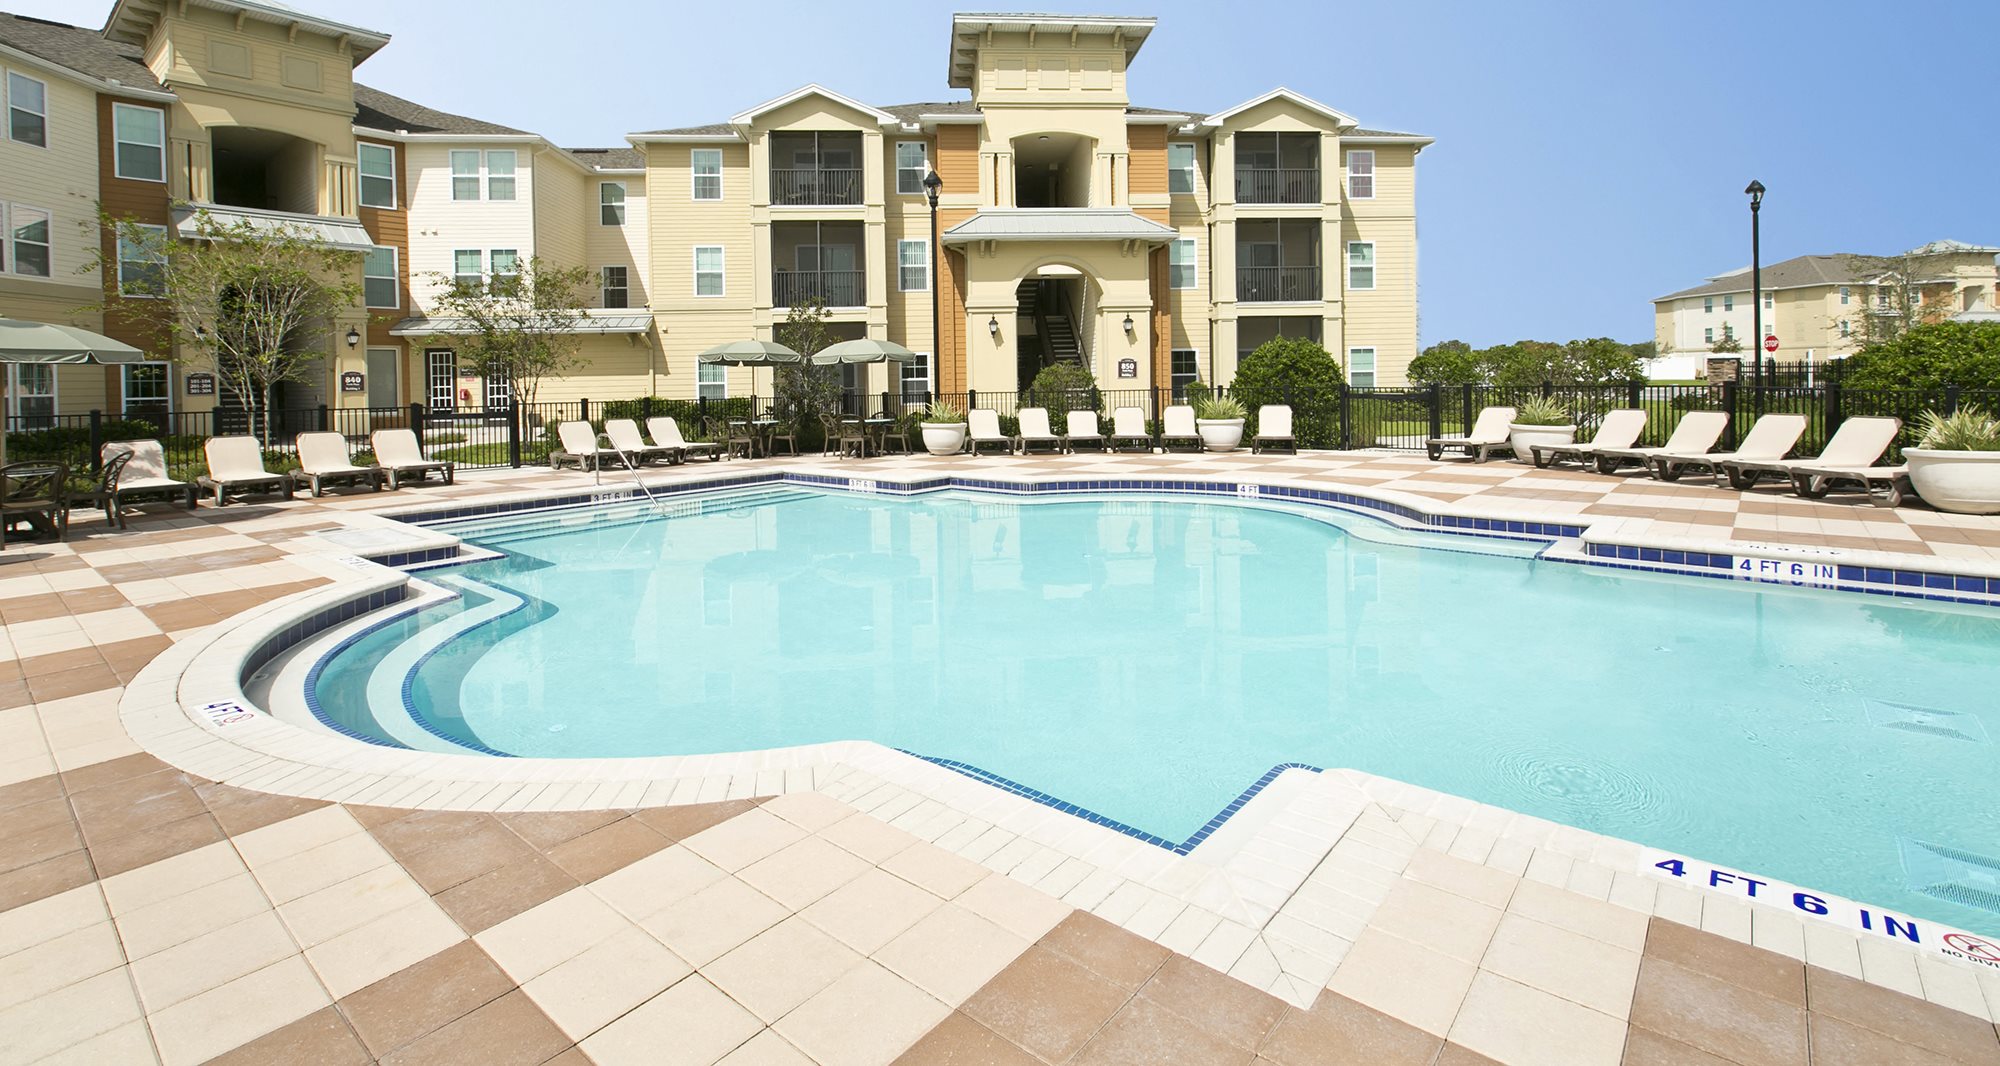 Apartments In Kissimmee Fl Fountains At San Remo Court